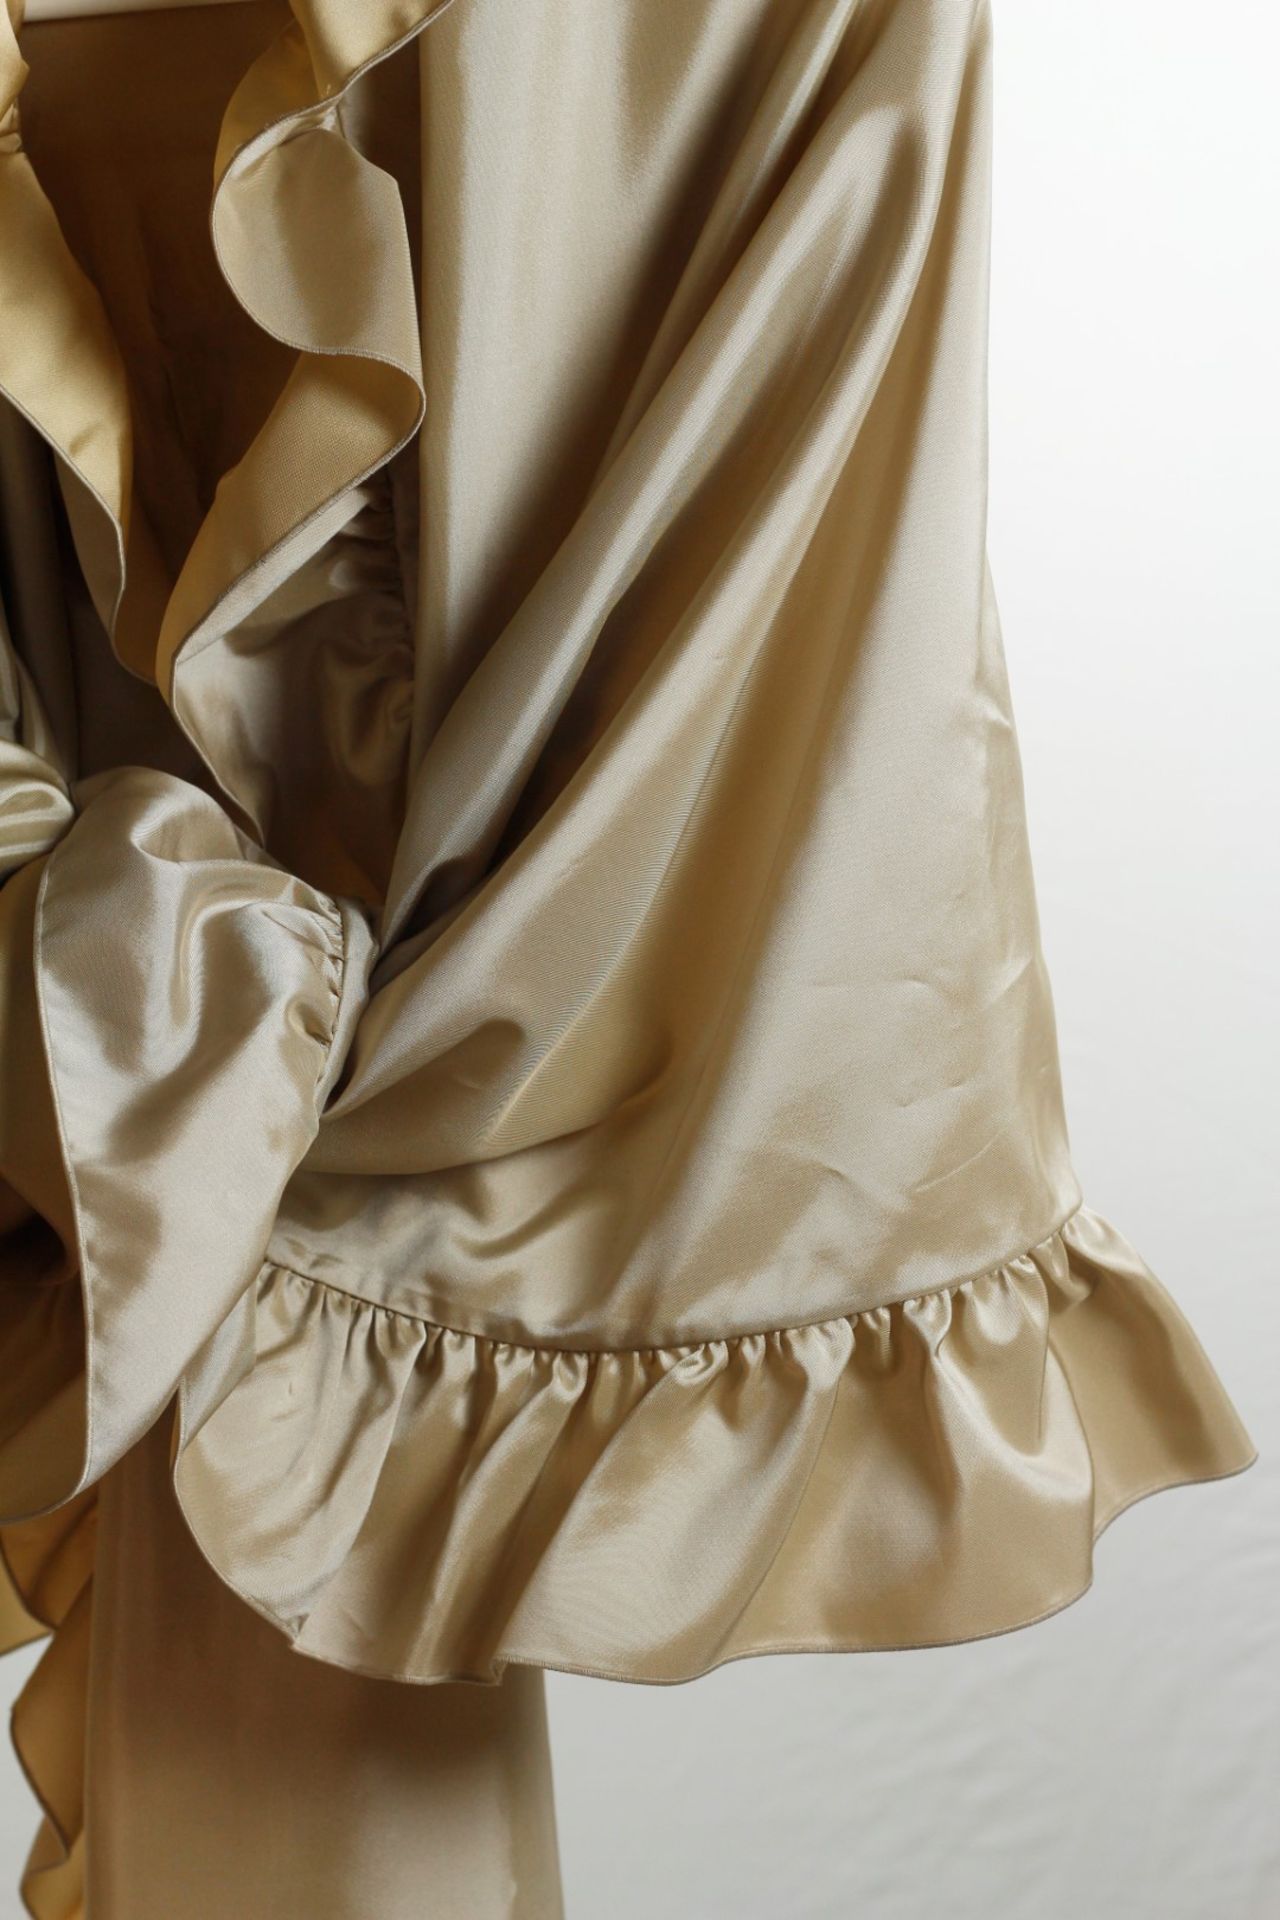 1 x Boutique Le Duc Champagne Wrap/Shawl - From a High End Clothing Boutique In The - Image 8 of 8